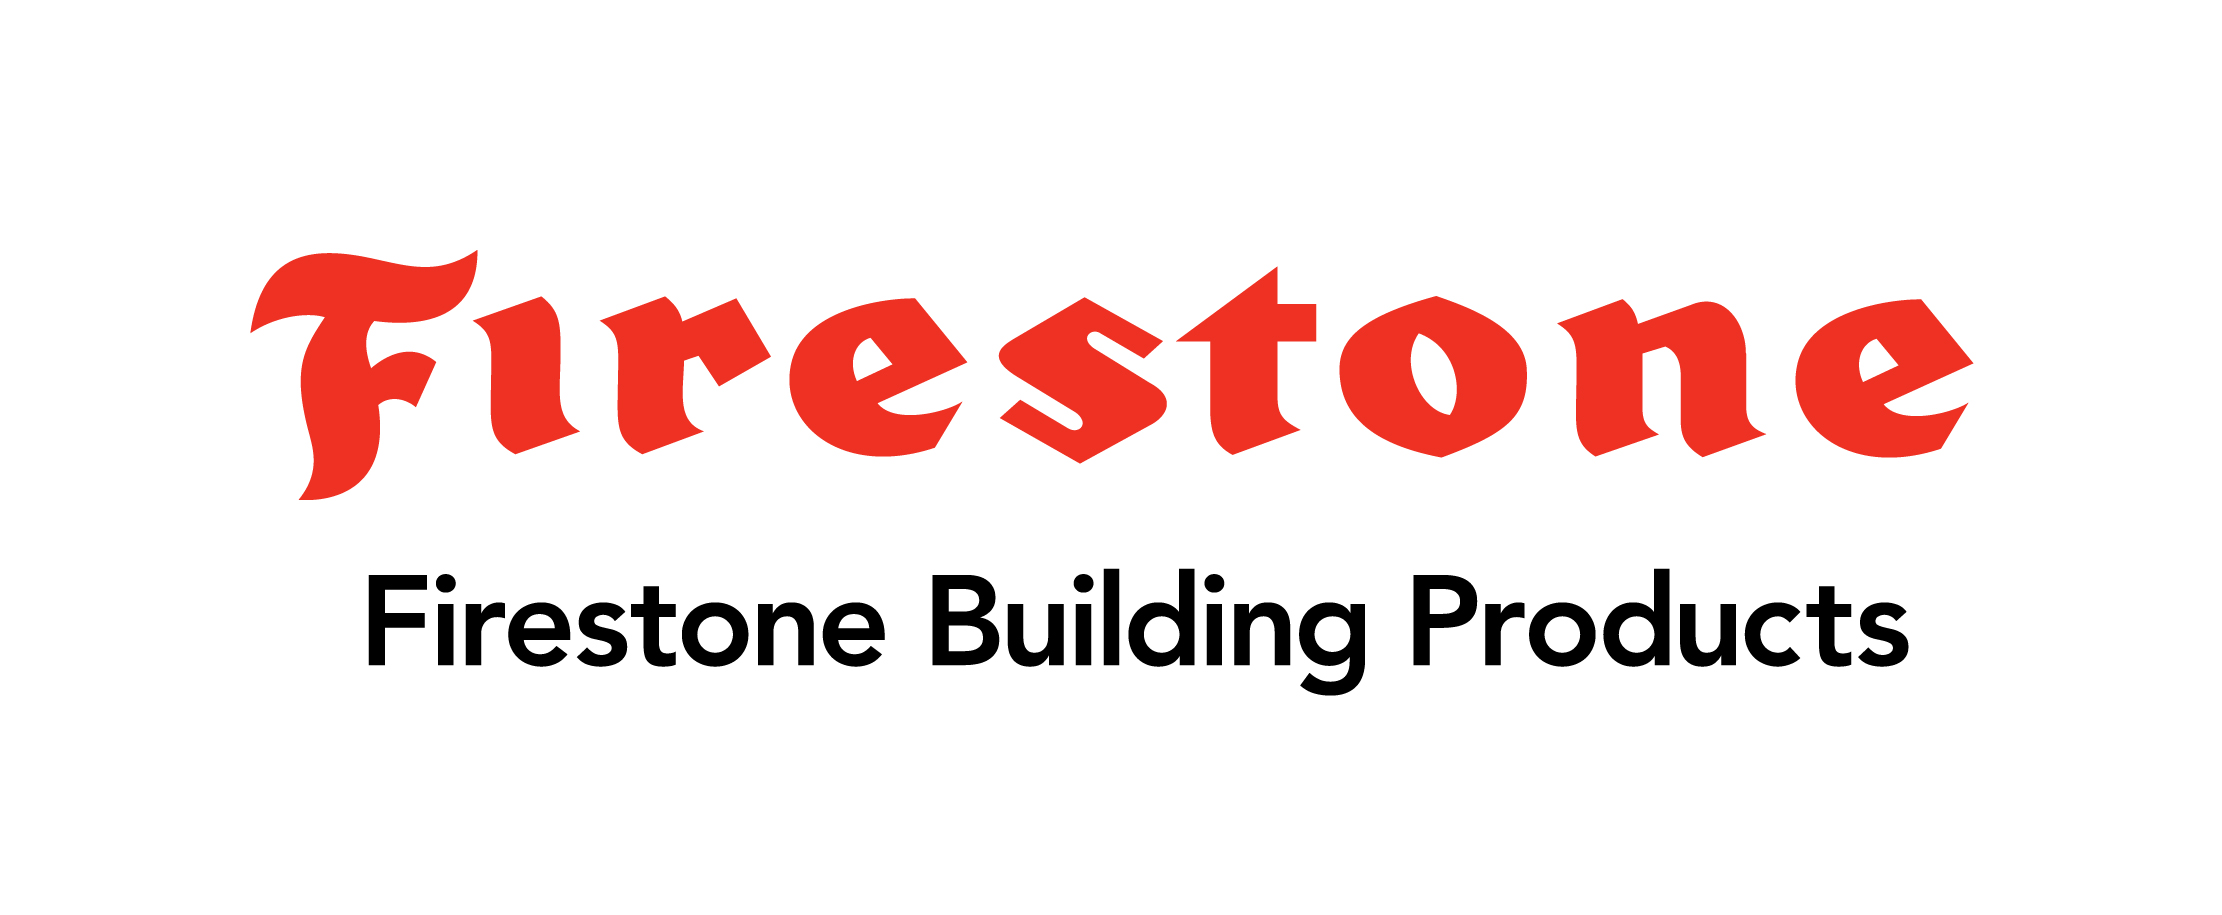 firestone-building-products-logos-color-firestone-building-products-RGB.JPG